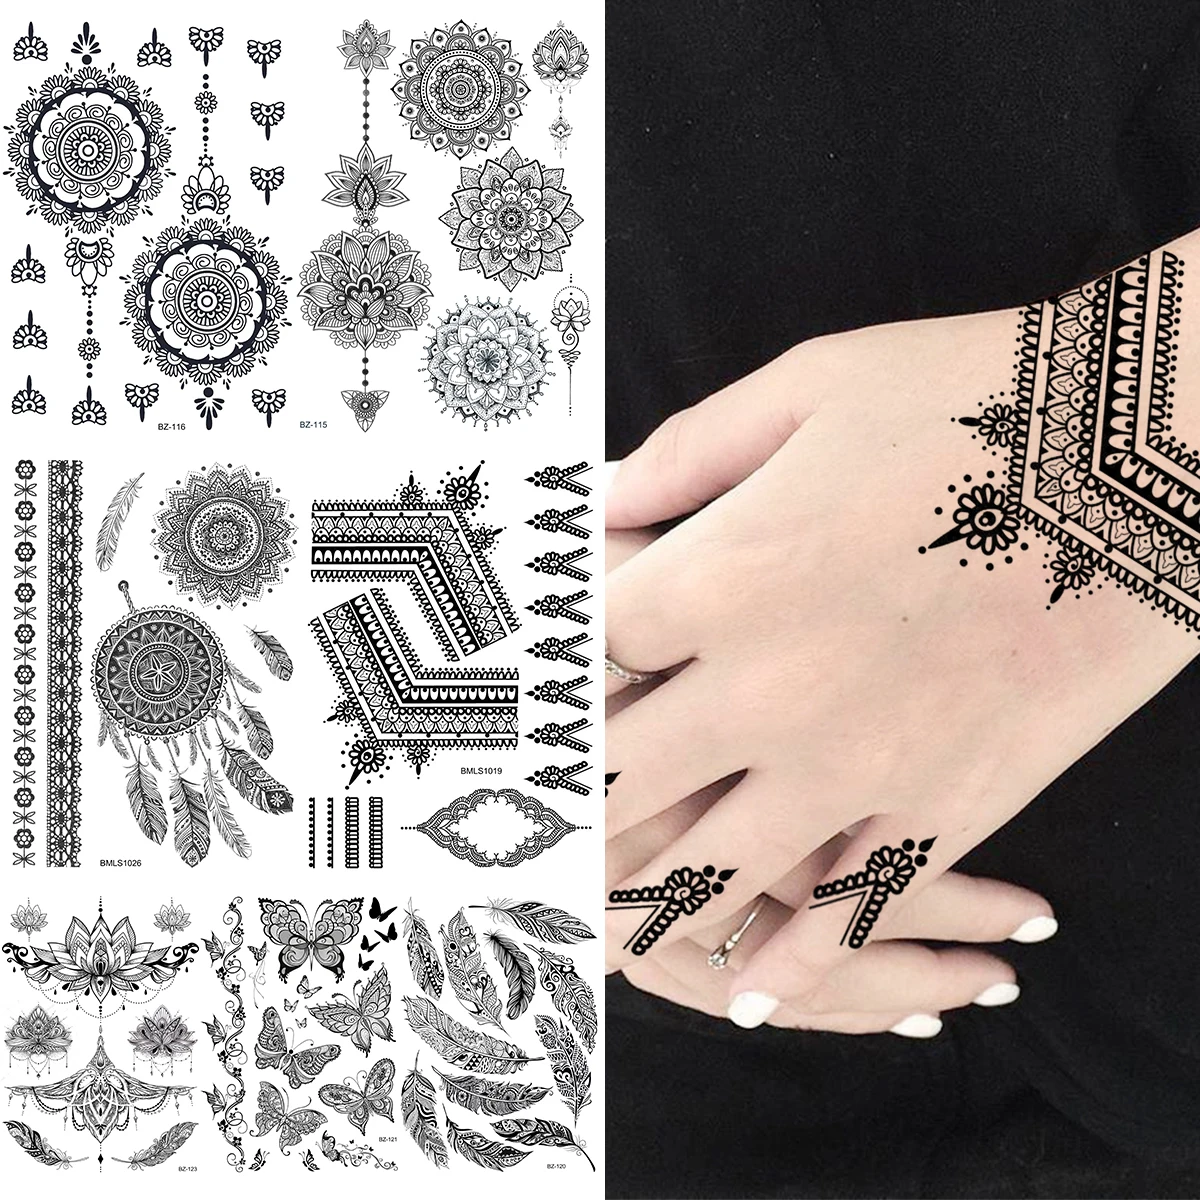 

Black Lace Henna Temporary Tattoos For Women Adults Realistic Henna Feather Tribal Fake Tattoo Sticker Finger Arm Tatoos 3D